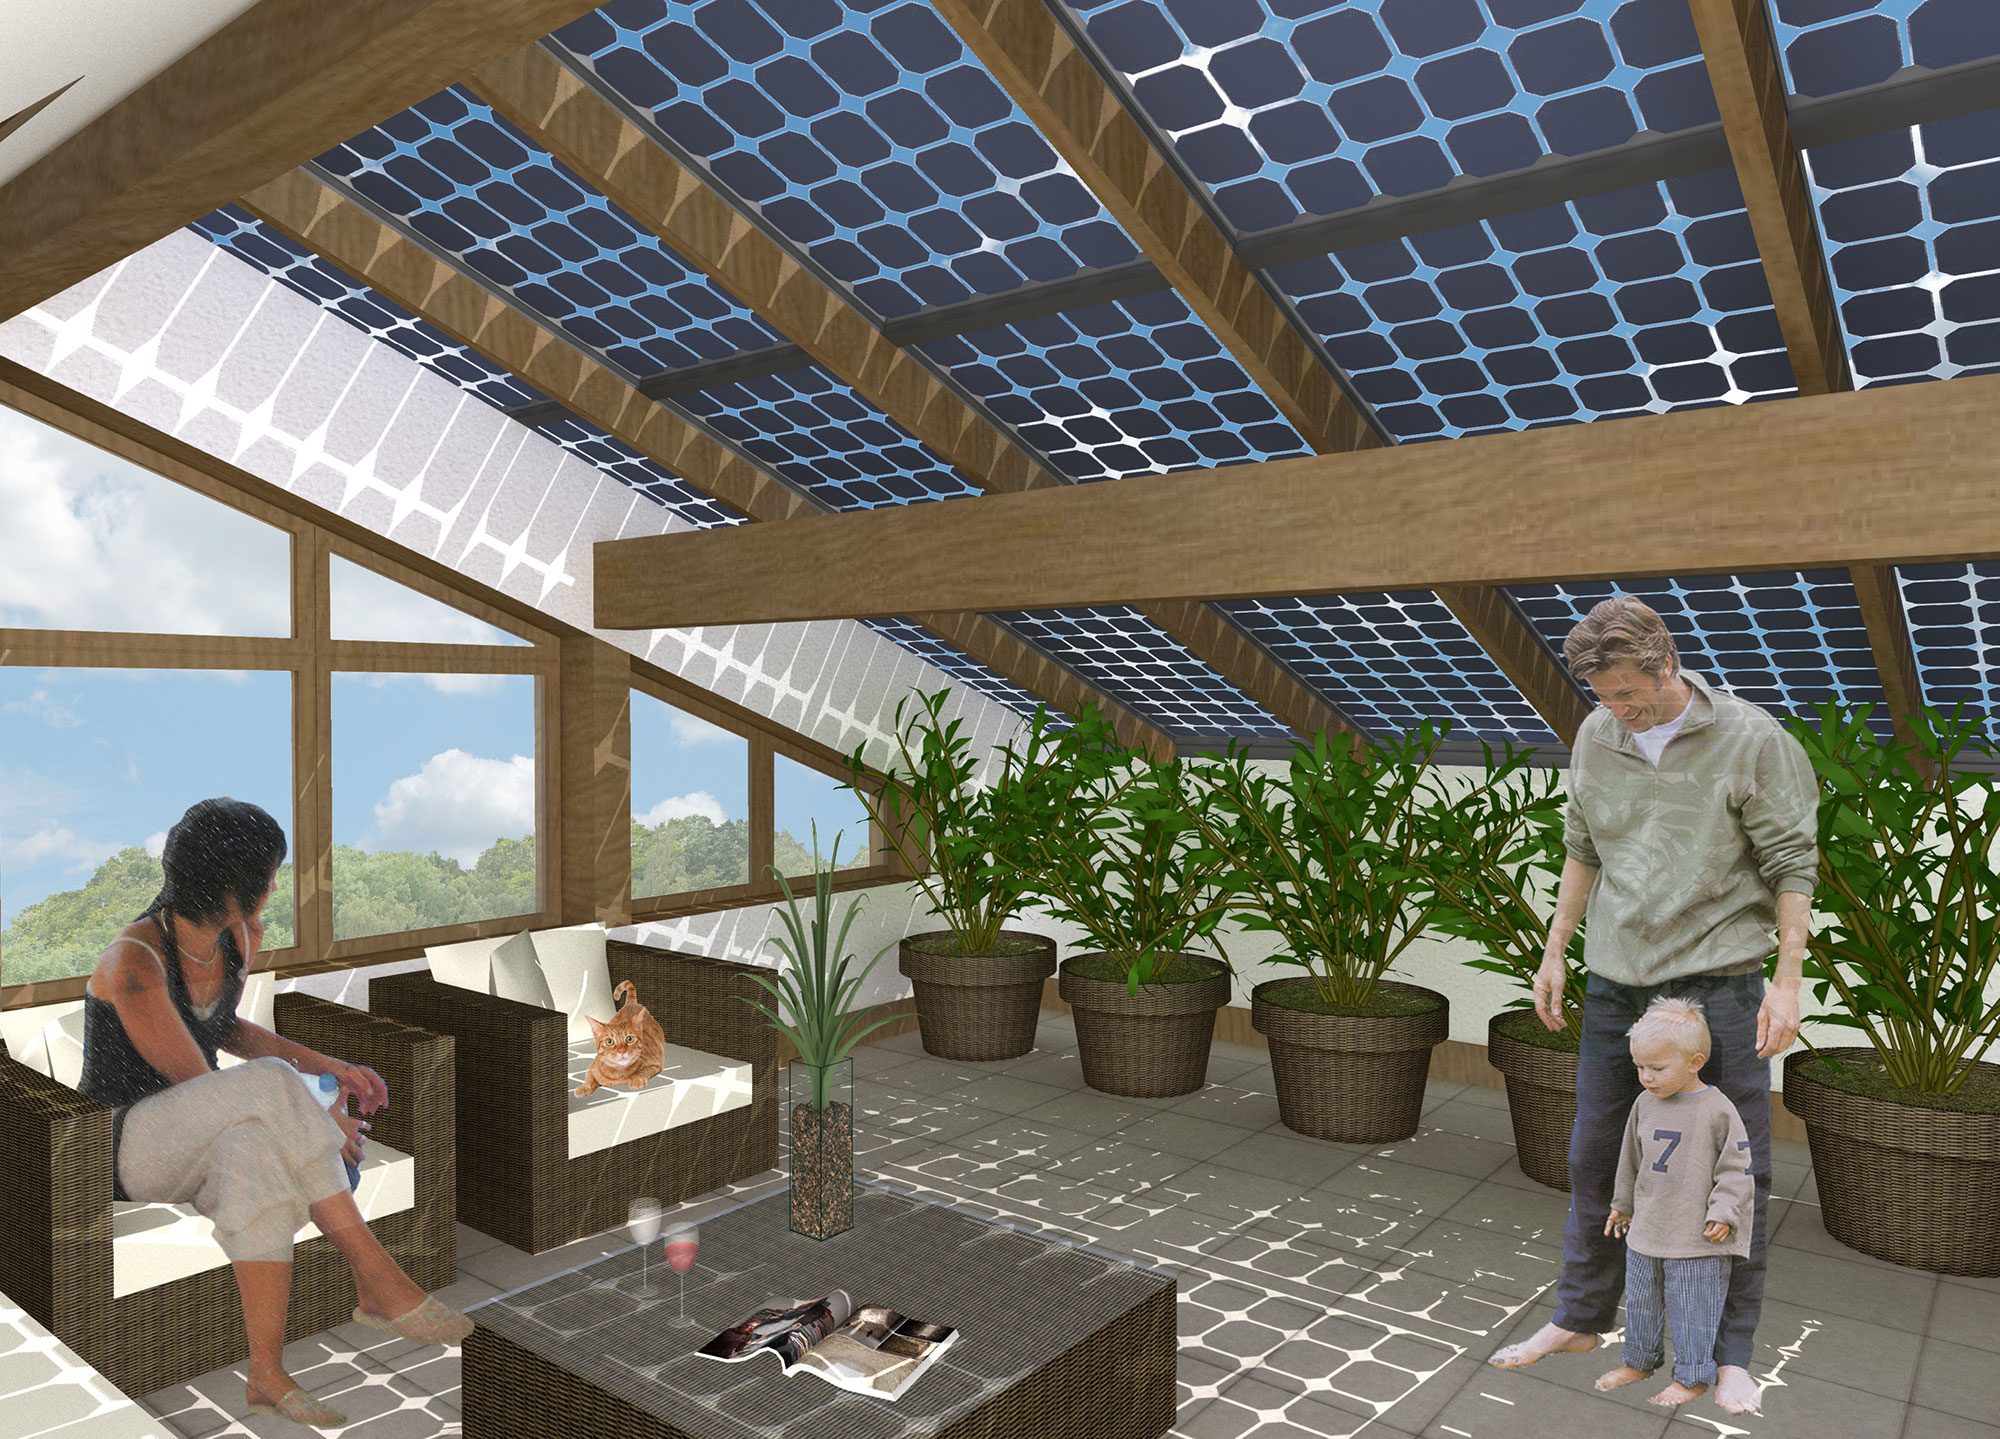 Internal shot of a ZEDRoof with solar PVs and a man with his son